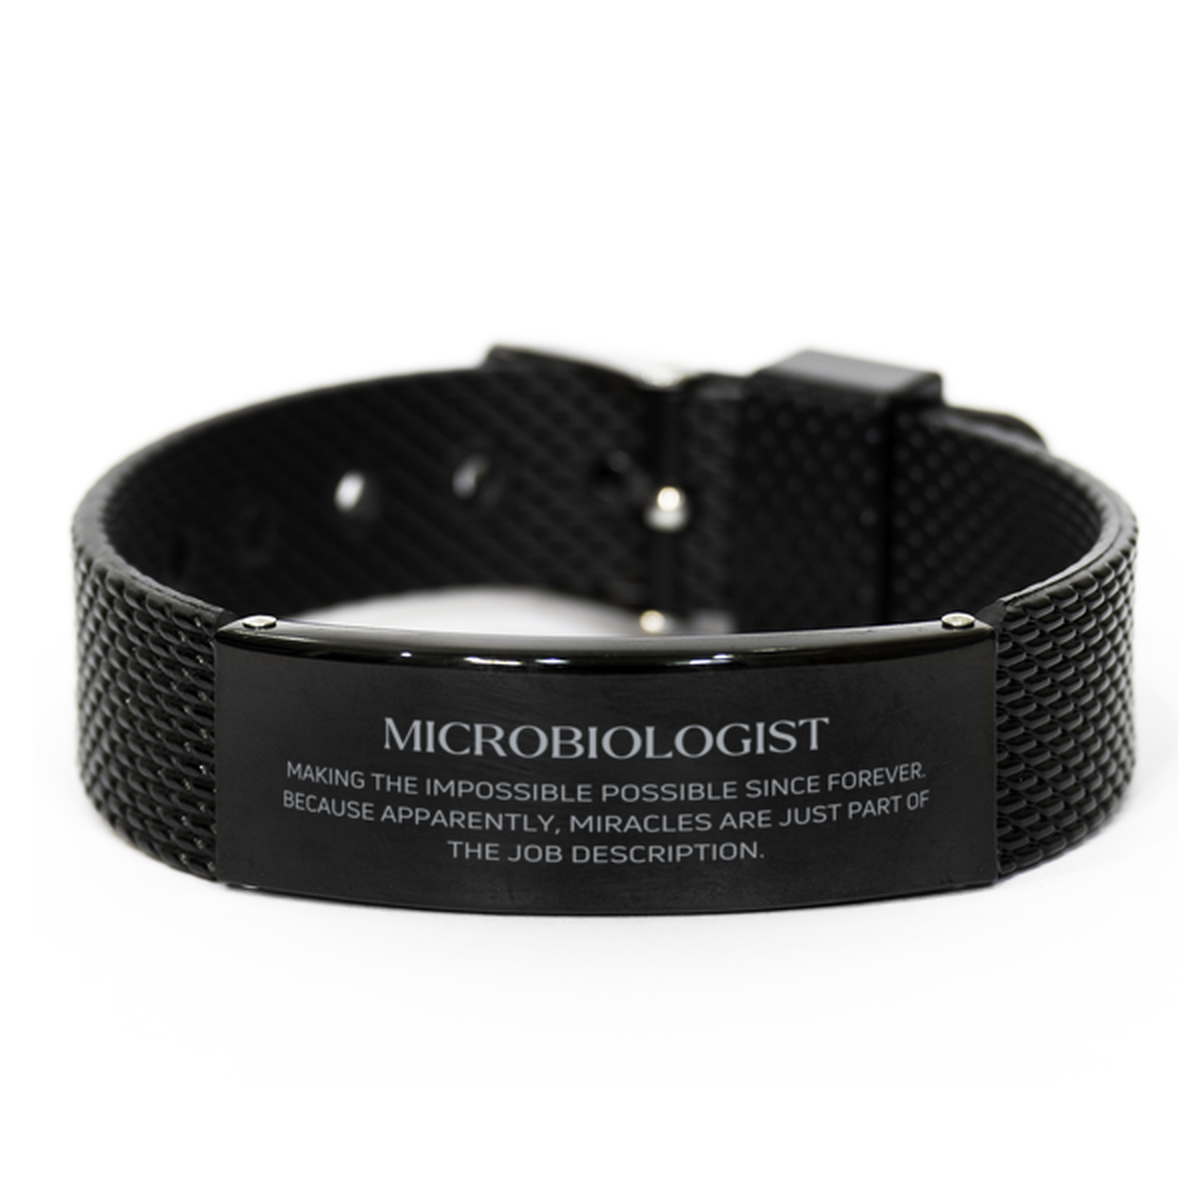 Funny Microbiologist Gifts, Miracles are just part of the job description, Inspirational Birthday Black Shark Mesh Bracelet For Microbiologist, Men, Women, Coworkers, Friends, Boss